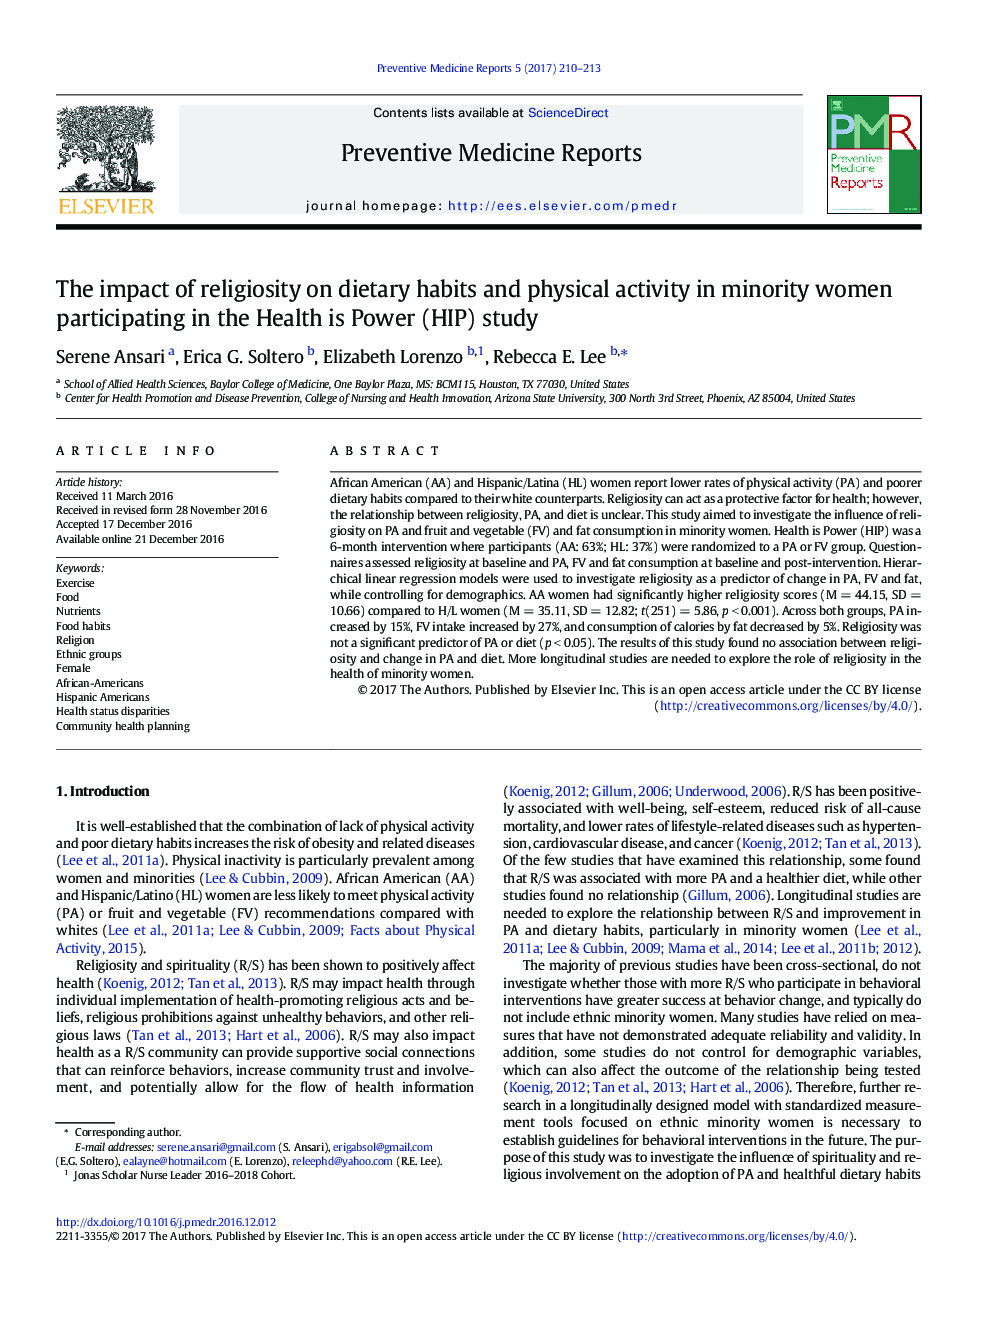 The impact of religiosity on dietary habits and physical activity in minority women participating in the Health is Power (HIP) study